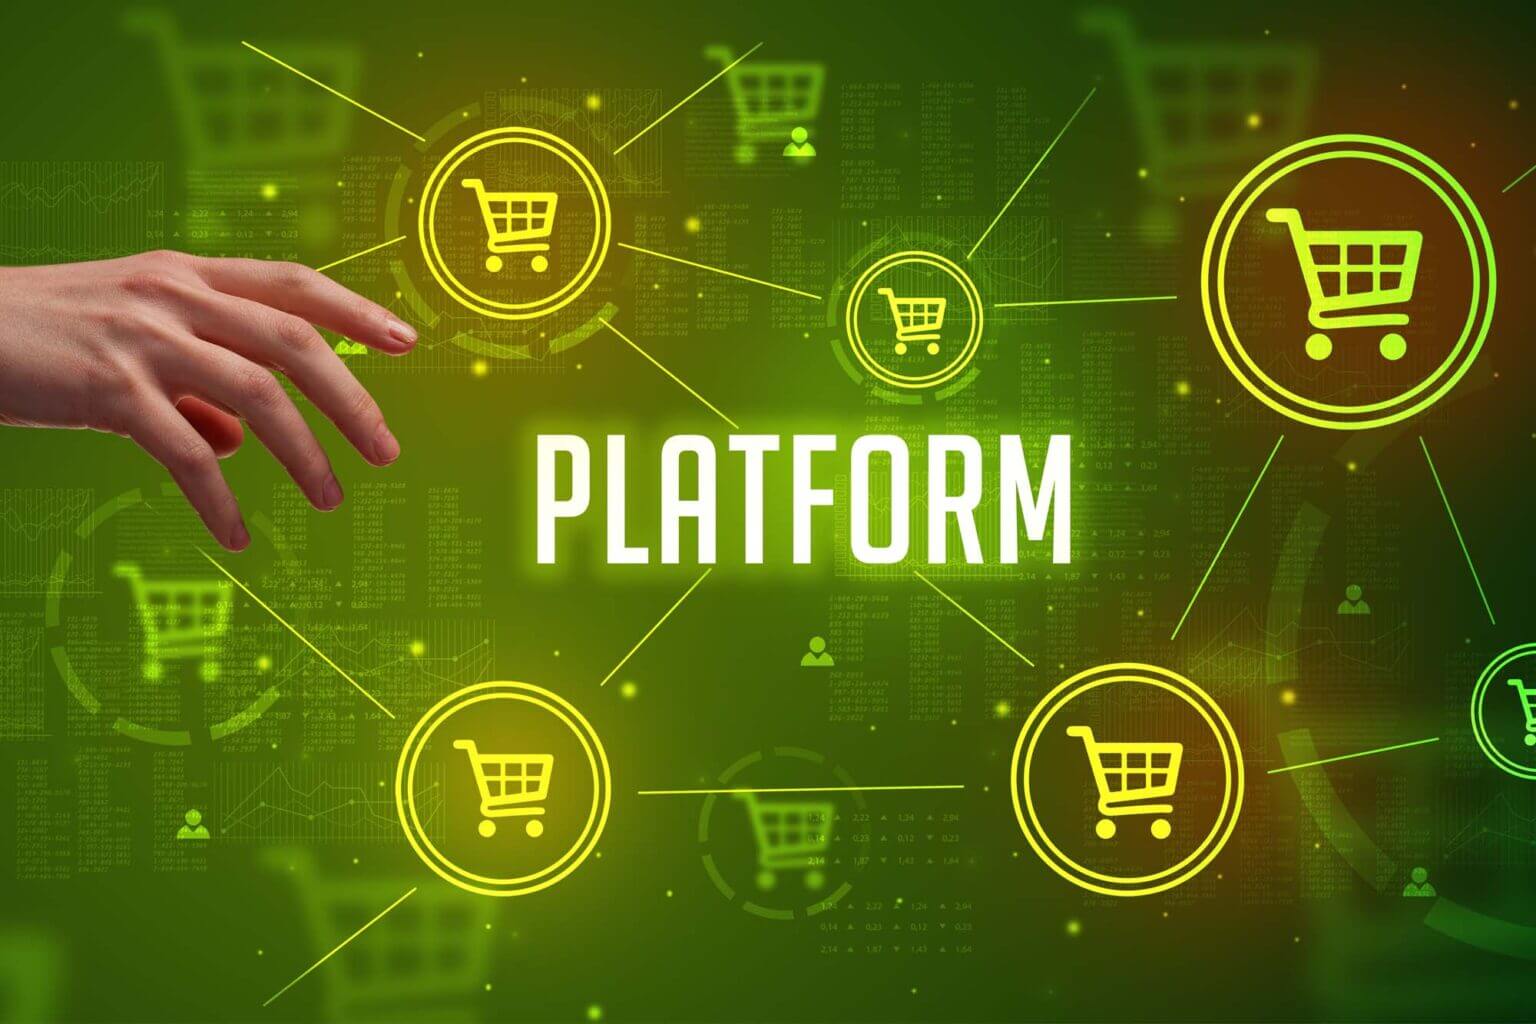 Choosing The Right E-Commerce Platform: Magento 2, WooCommerce, or Shopify?